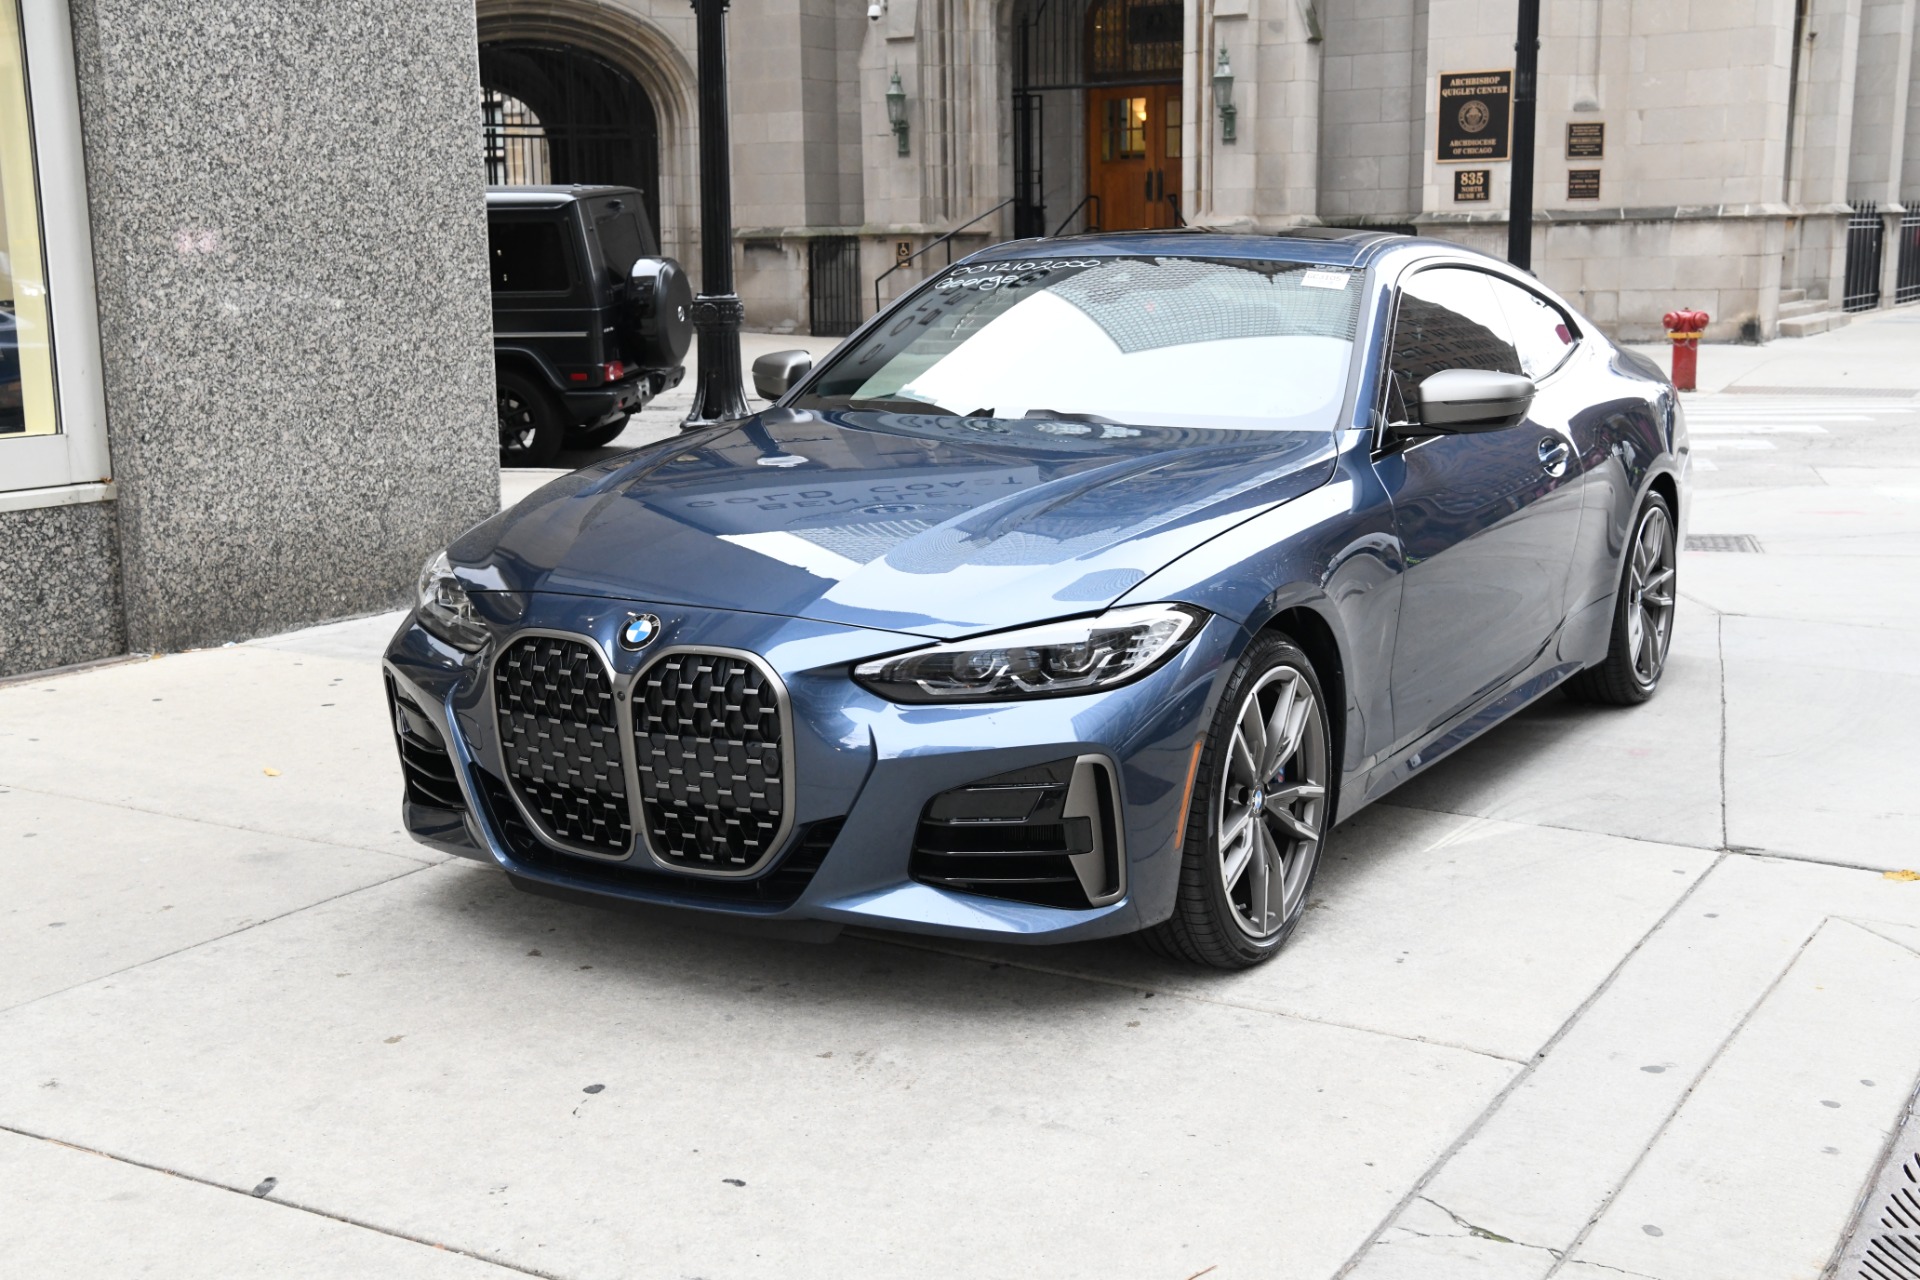 2021 BMW 4 Series M440i xDrive Stock # GC3105 for sale near Chicago, IL